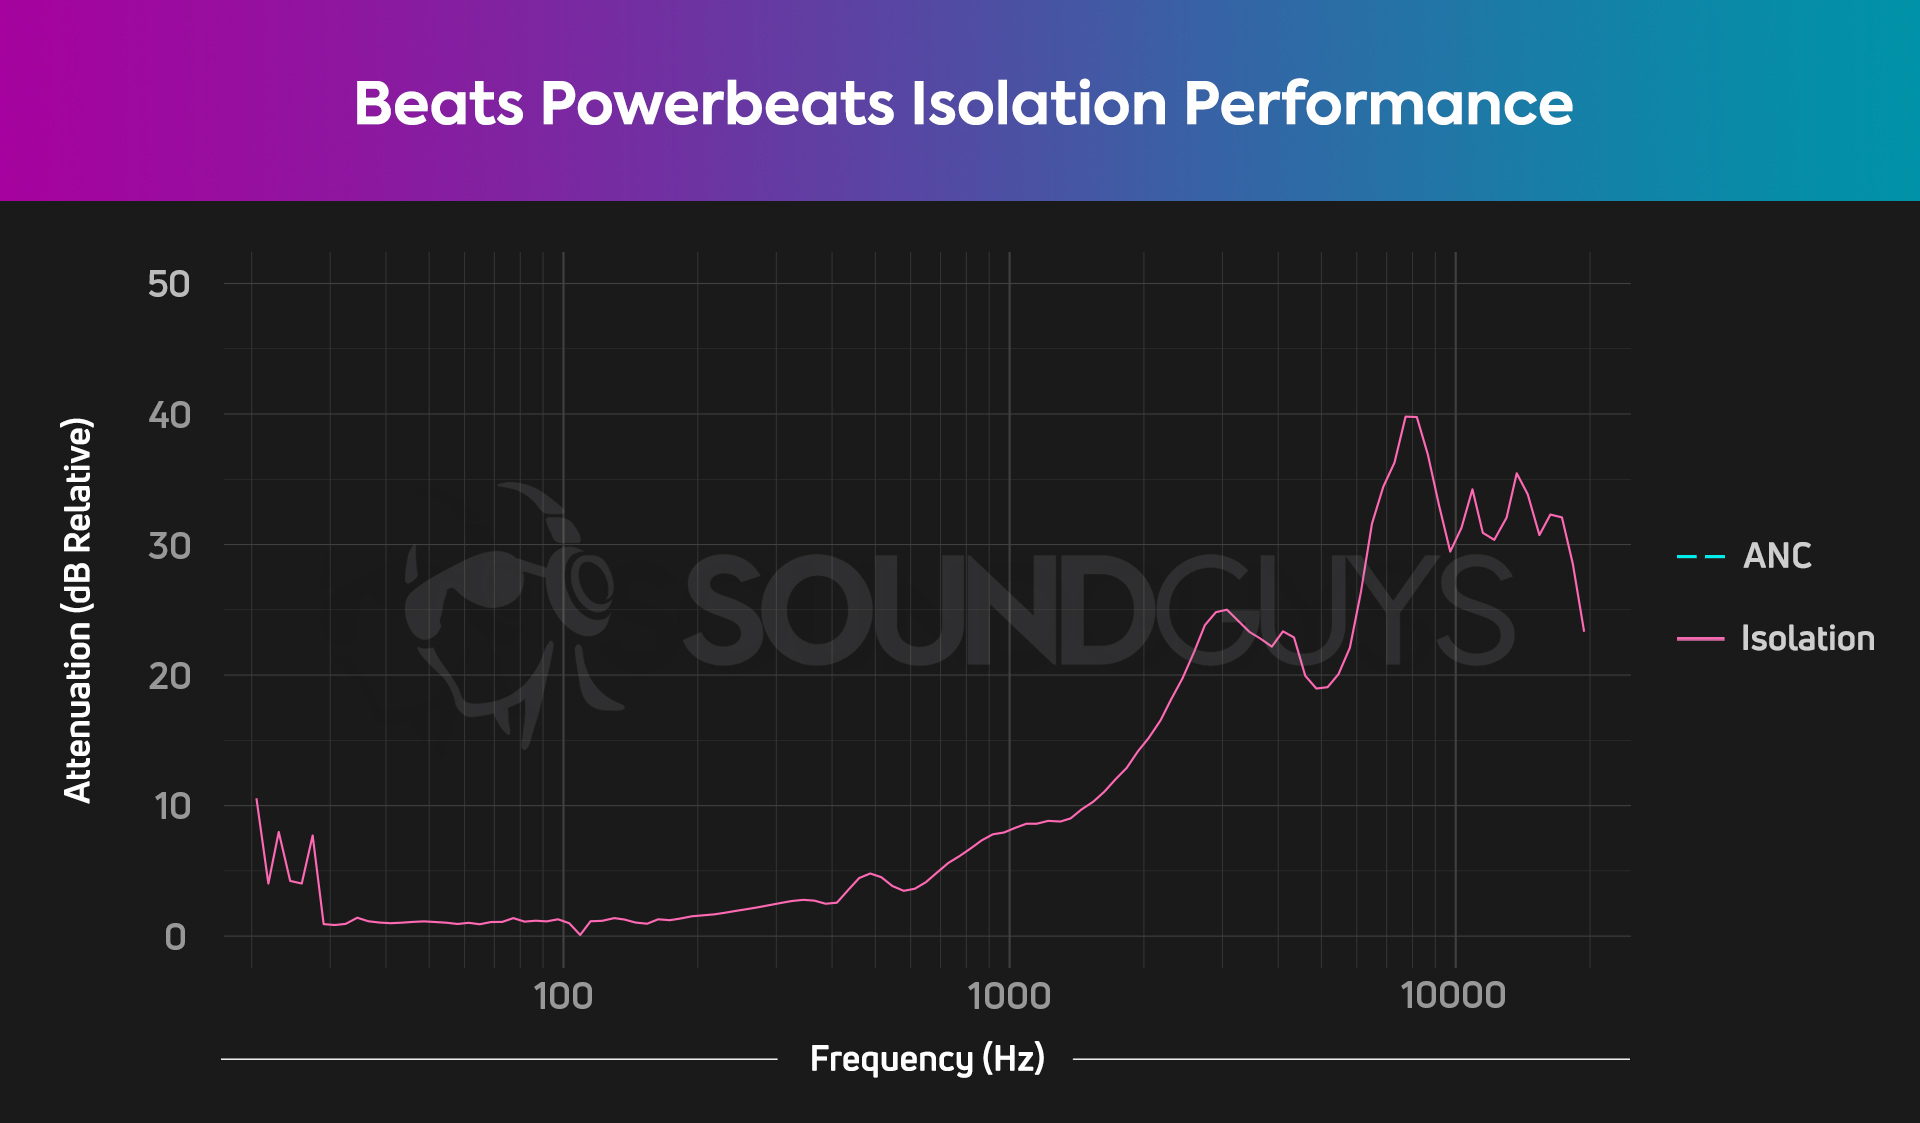 An isolation chart for the Beats Powerbeats wireless earbuds, which show pretty average isolation.